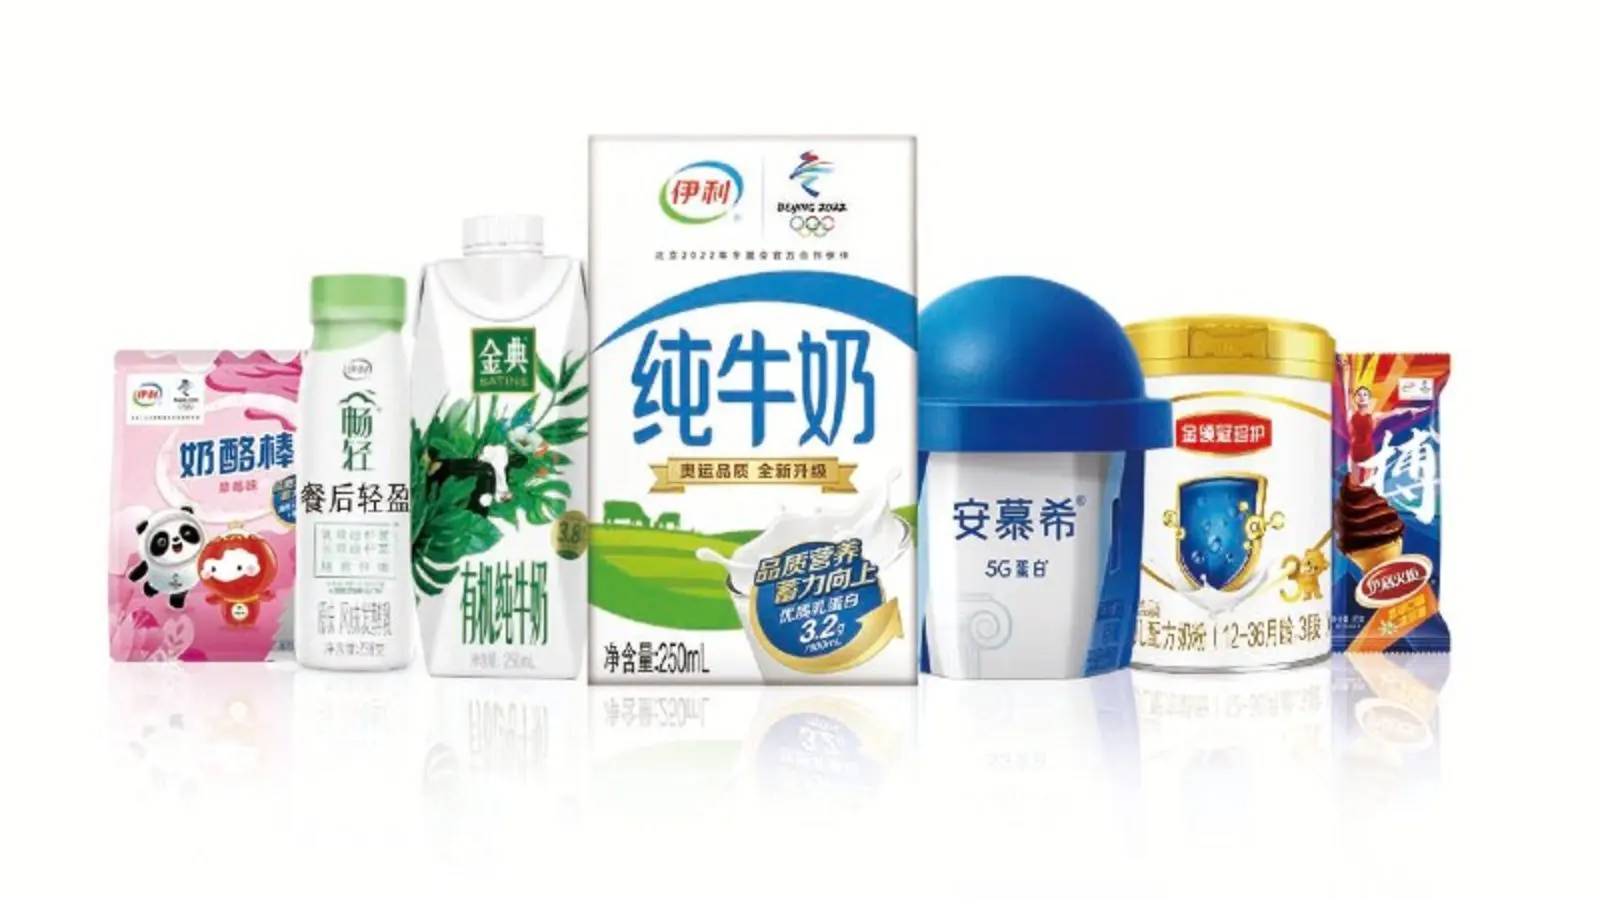 Yili to strengthen overseas presence through US$100-million private investment equity fund